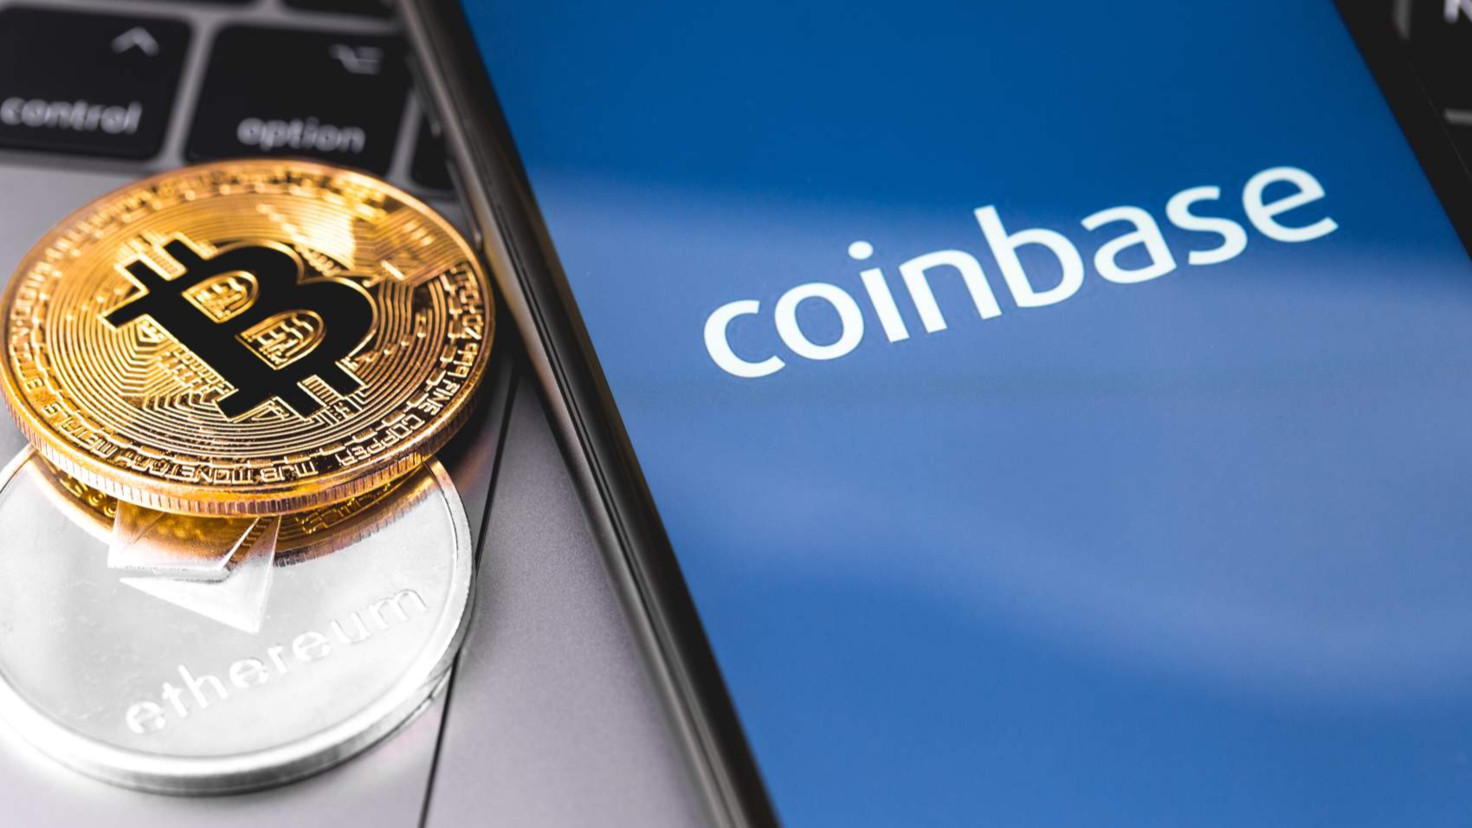 Crypto exchange Coinbase has generated nearly $2bn in transaction fees since 2012